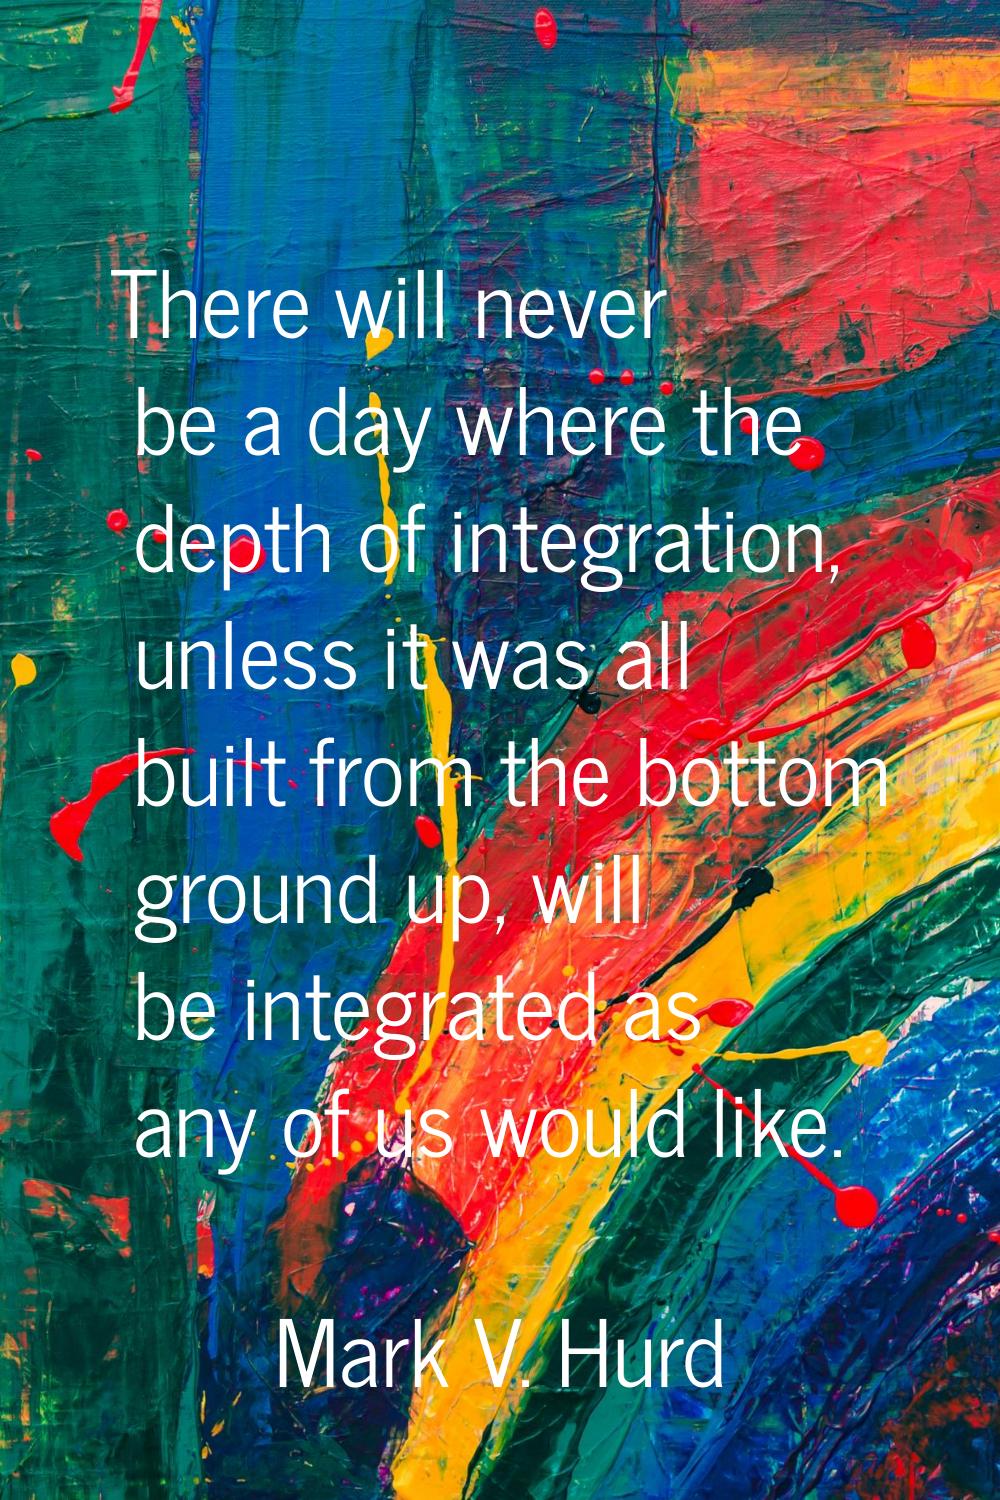 There will never be a day where the depth of integration, unless it was all built from the bottom g